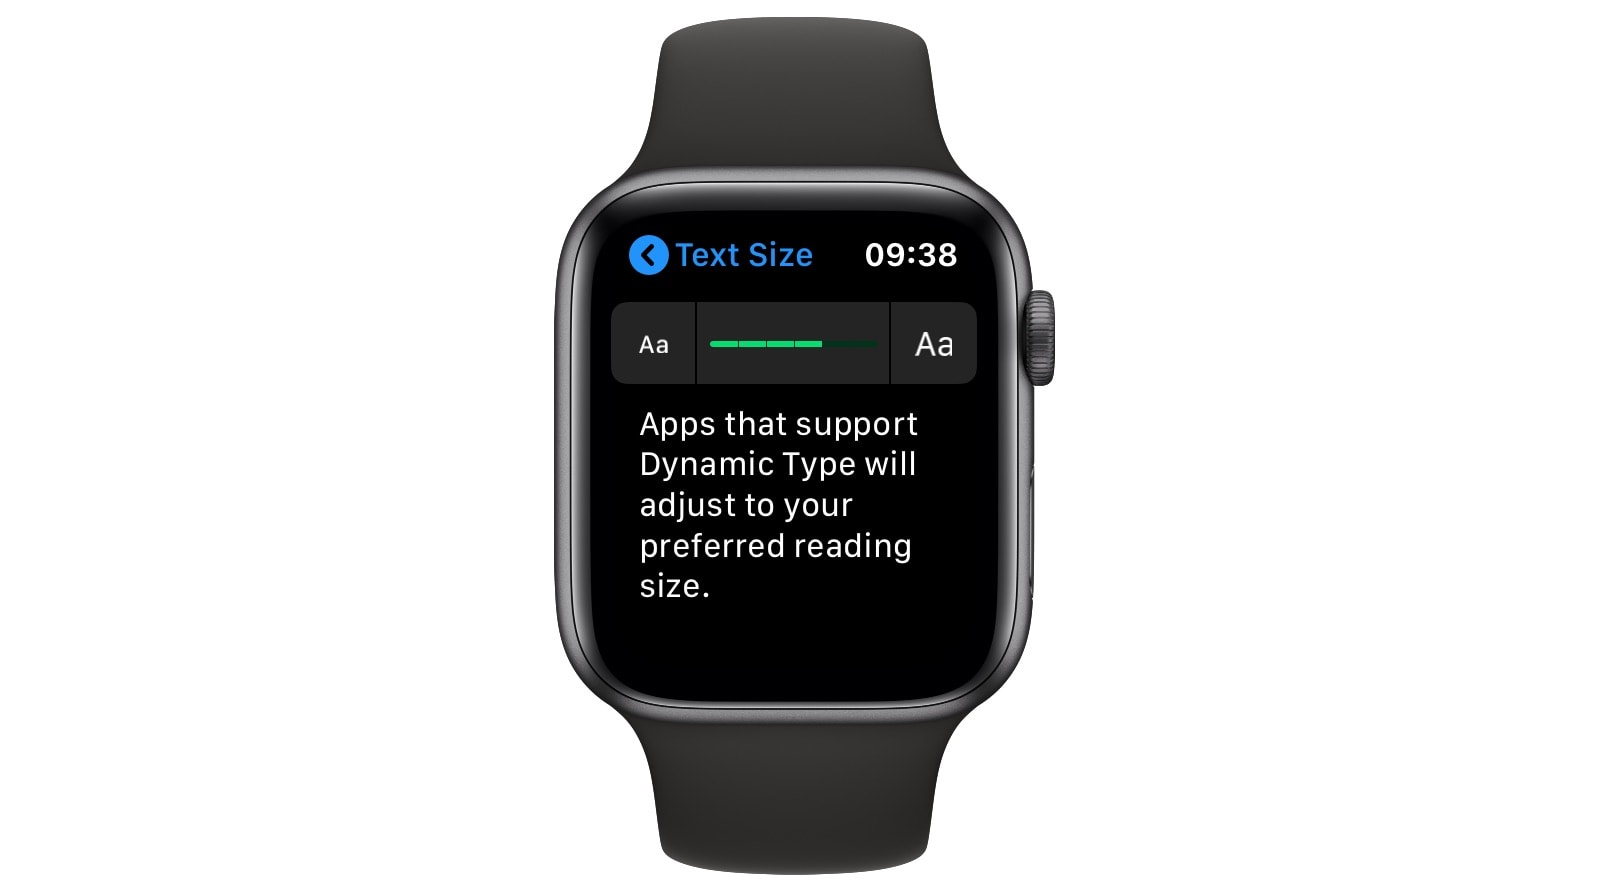 Maybe you just want to make Apple Watch text a bit bigger.